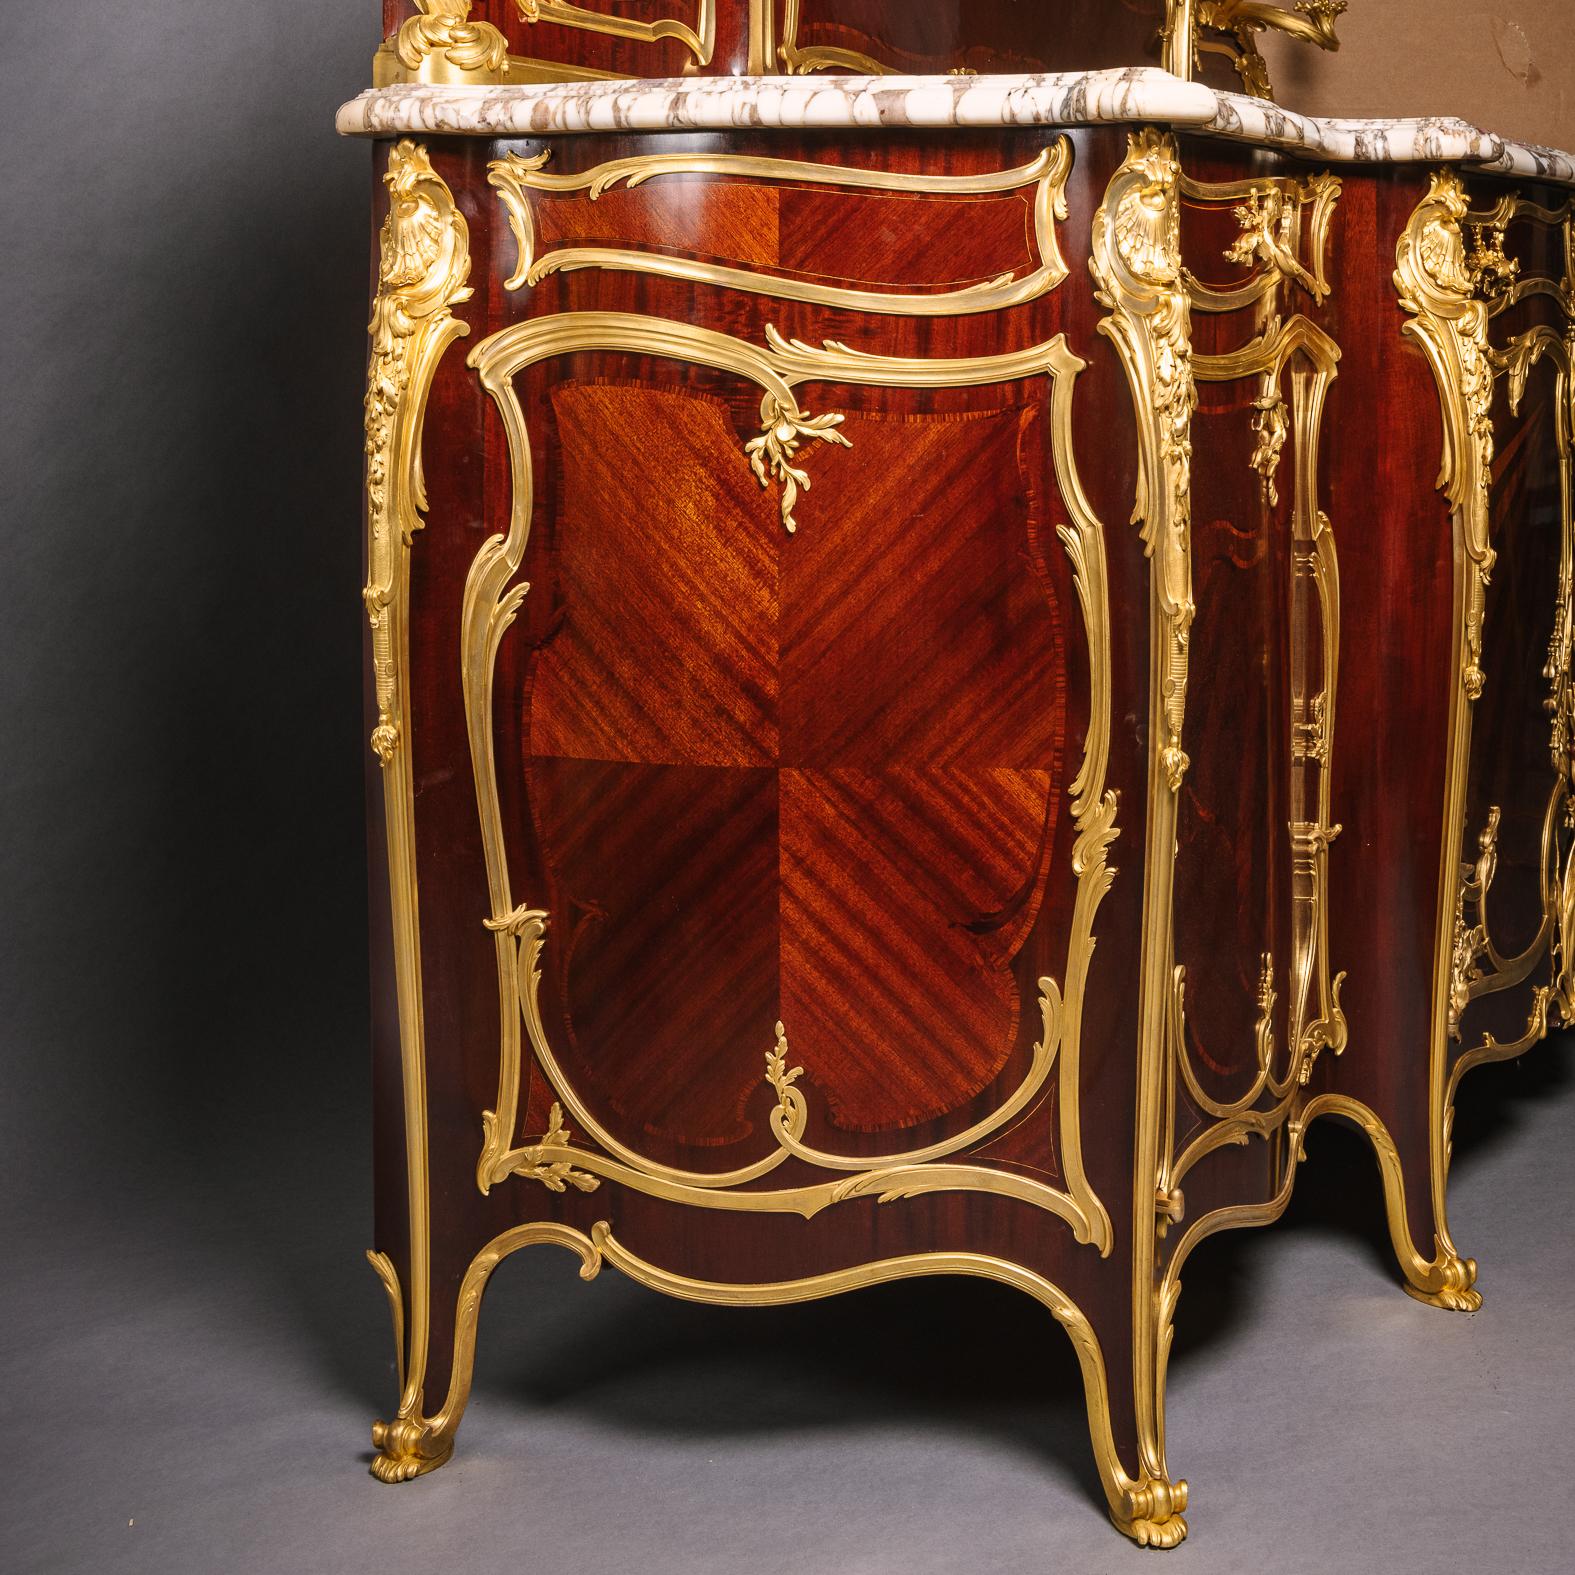 Belle Epoque Gilt-Bronze Mounted Parquetry Inlaid Buffet, By François Linke For Sale 7